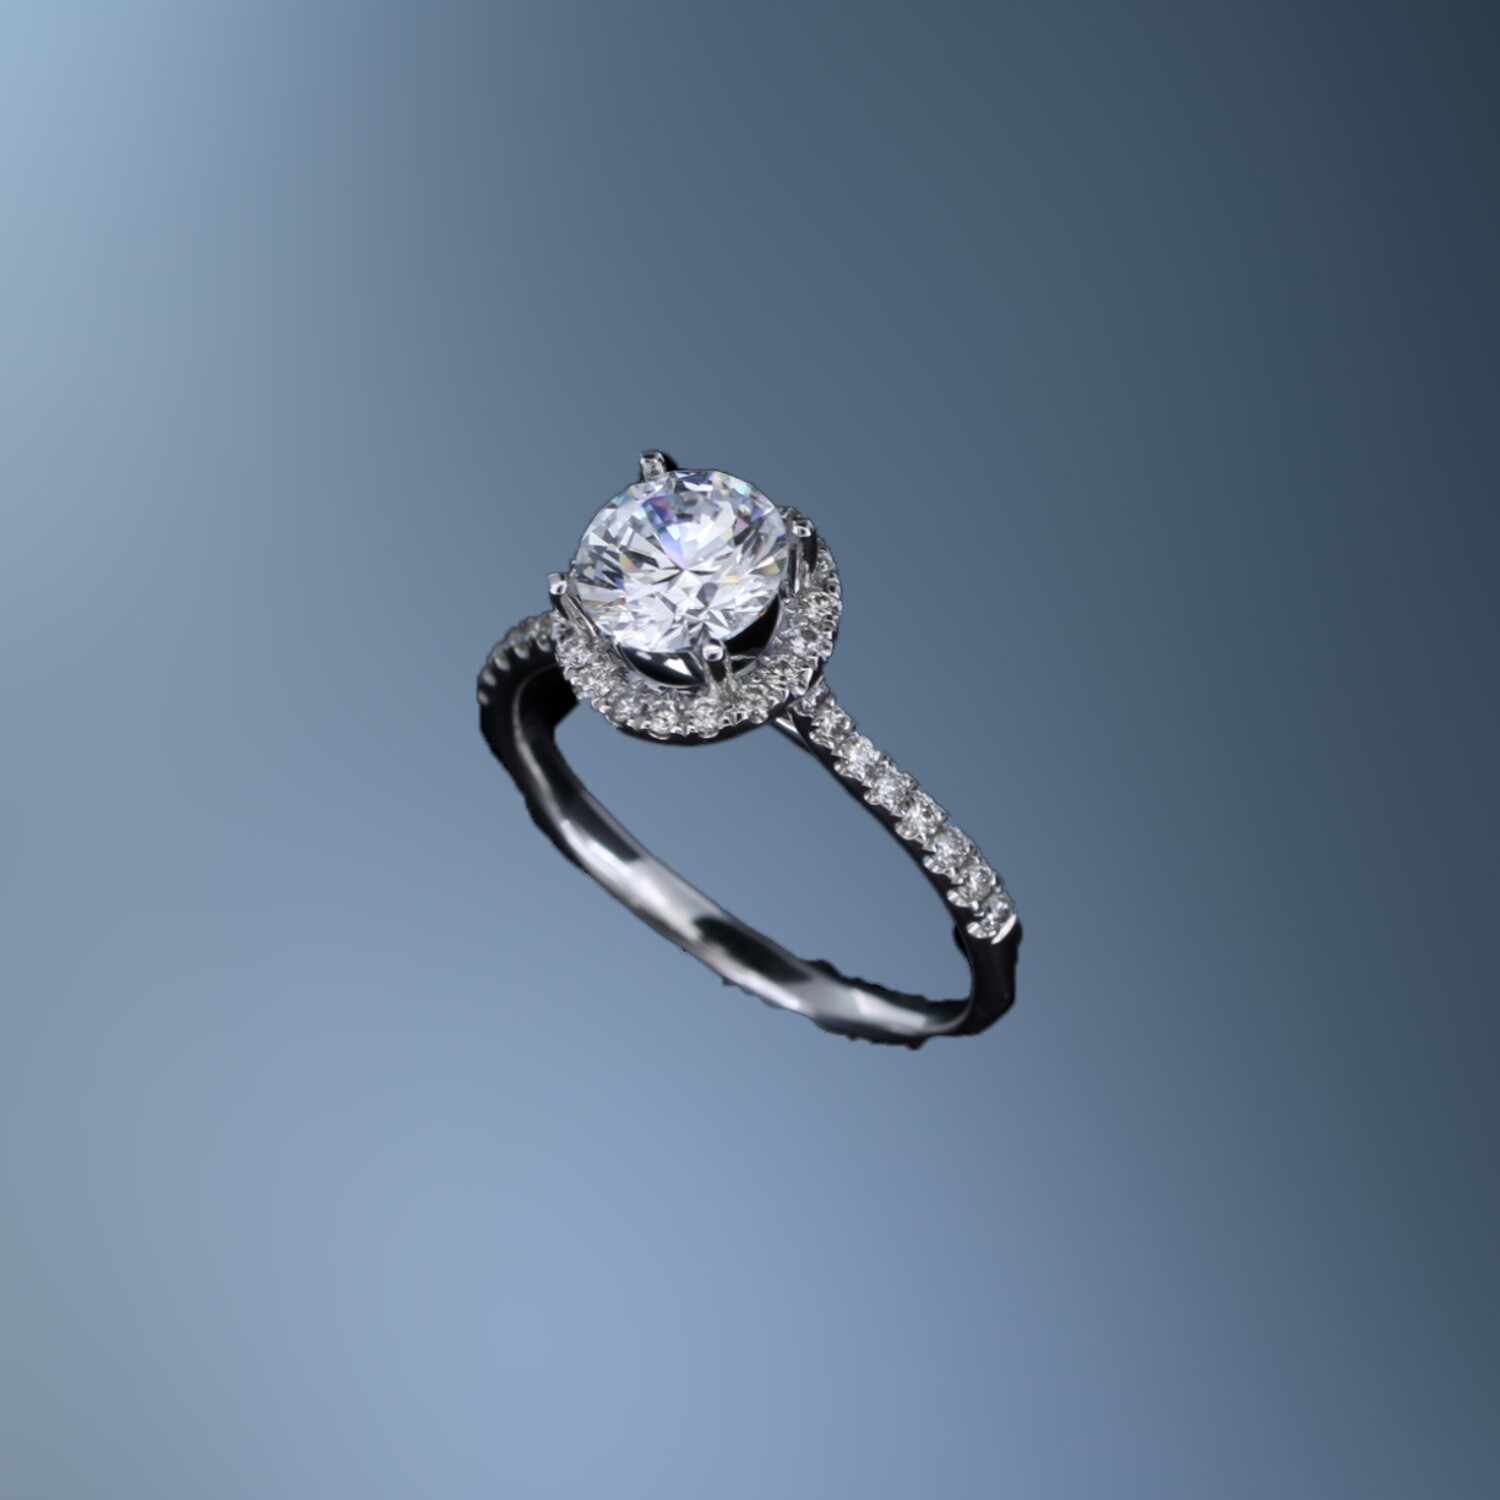 ​14KT WHITE GOLD HALO ENGAGEMENT RING FEATURING 34 ROUND BRILLIANT CUT DIAMONDS TOTALING 0.24 CTS.